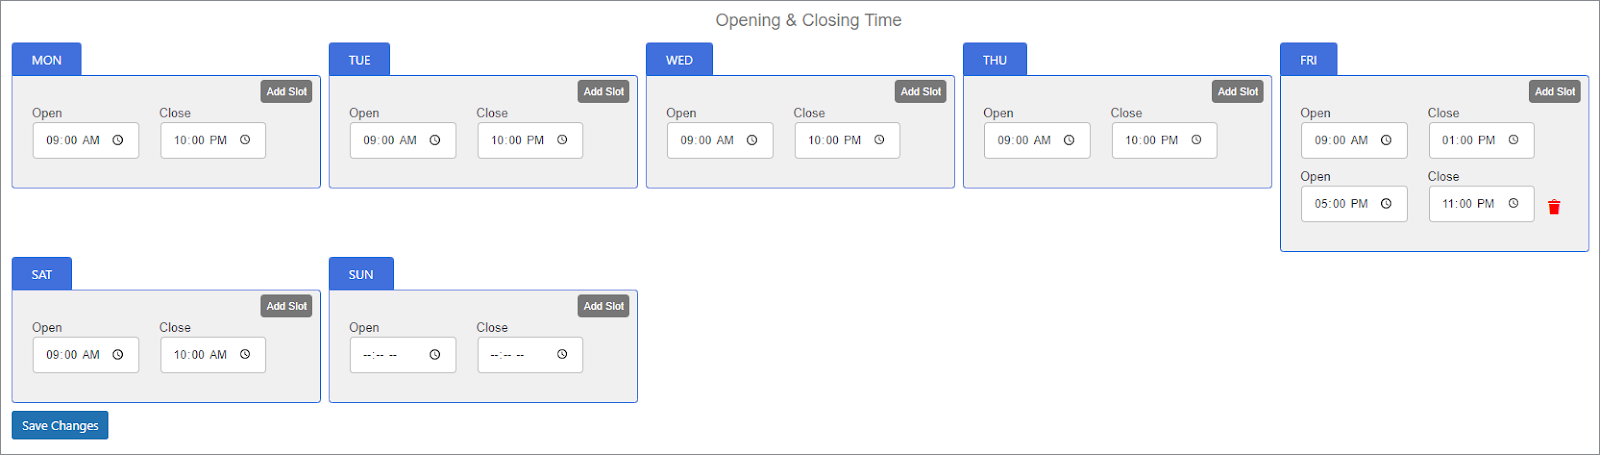 Opening and Closing Time Slots 